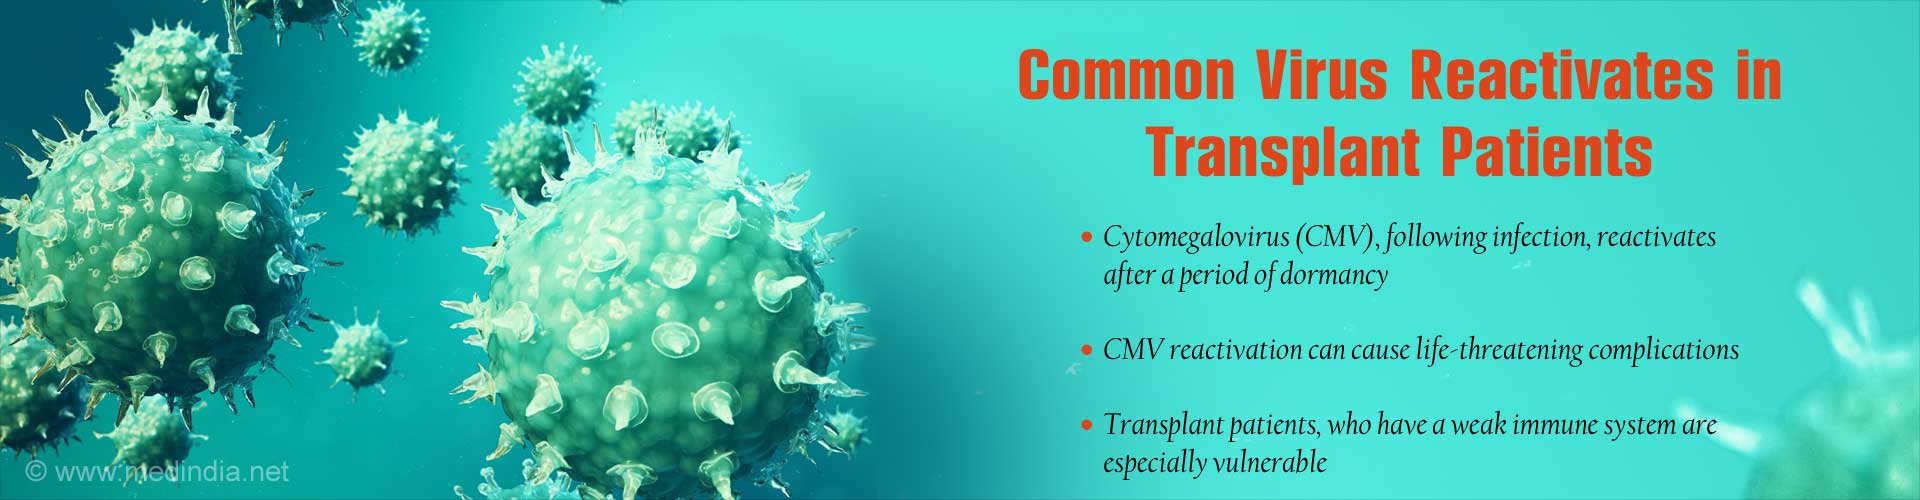 Common virus reactivates in transplant patients. Cytomegalovirus (CMV), following infection, reactivates after a period of dormancy. CMV reactivation can cause life-threatening complications. Transplant patients, who have a weak immune system are especially vulnerable. 
